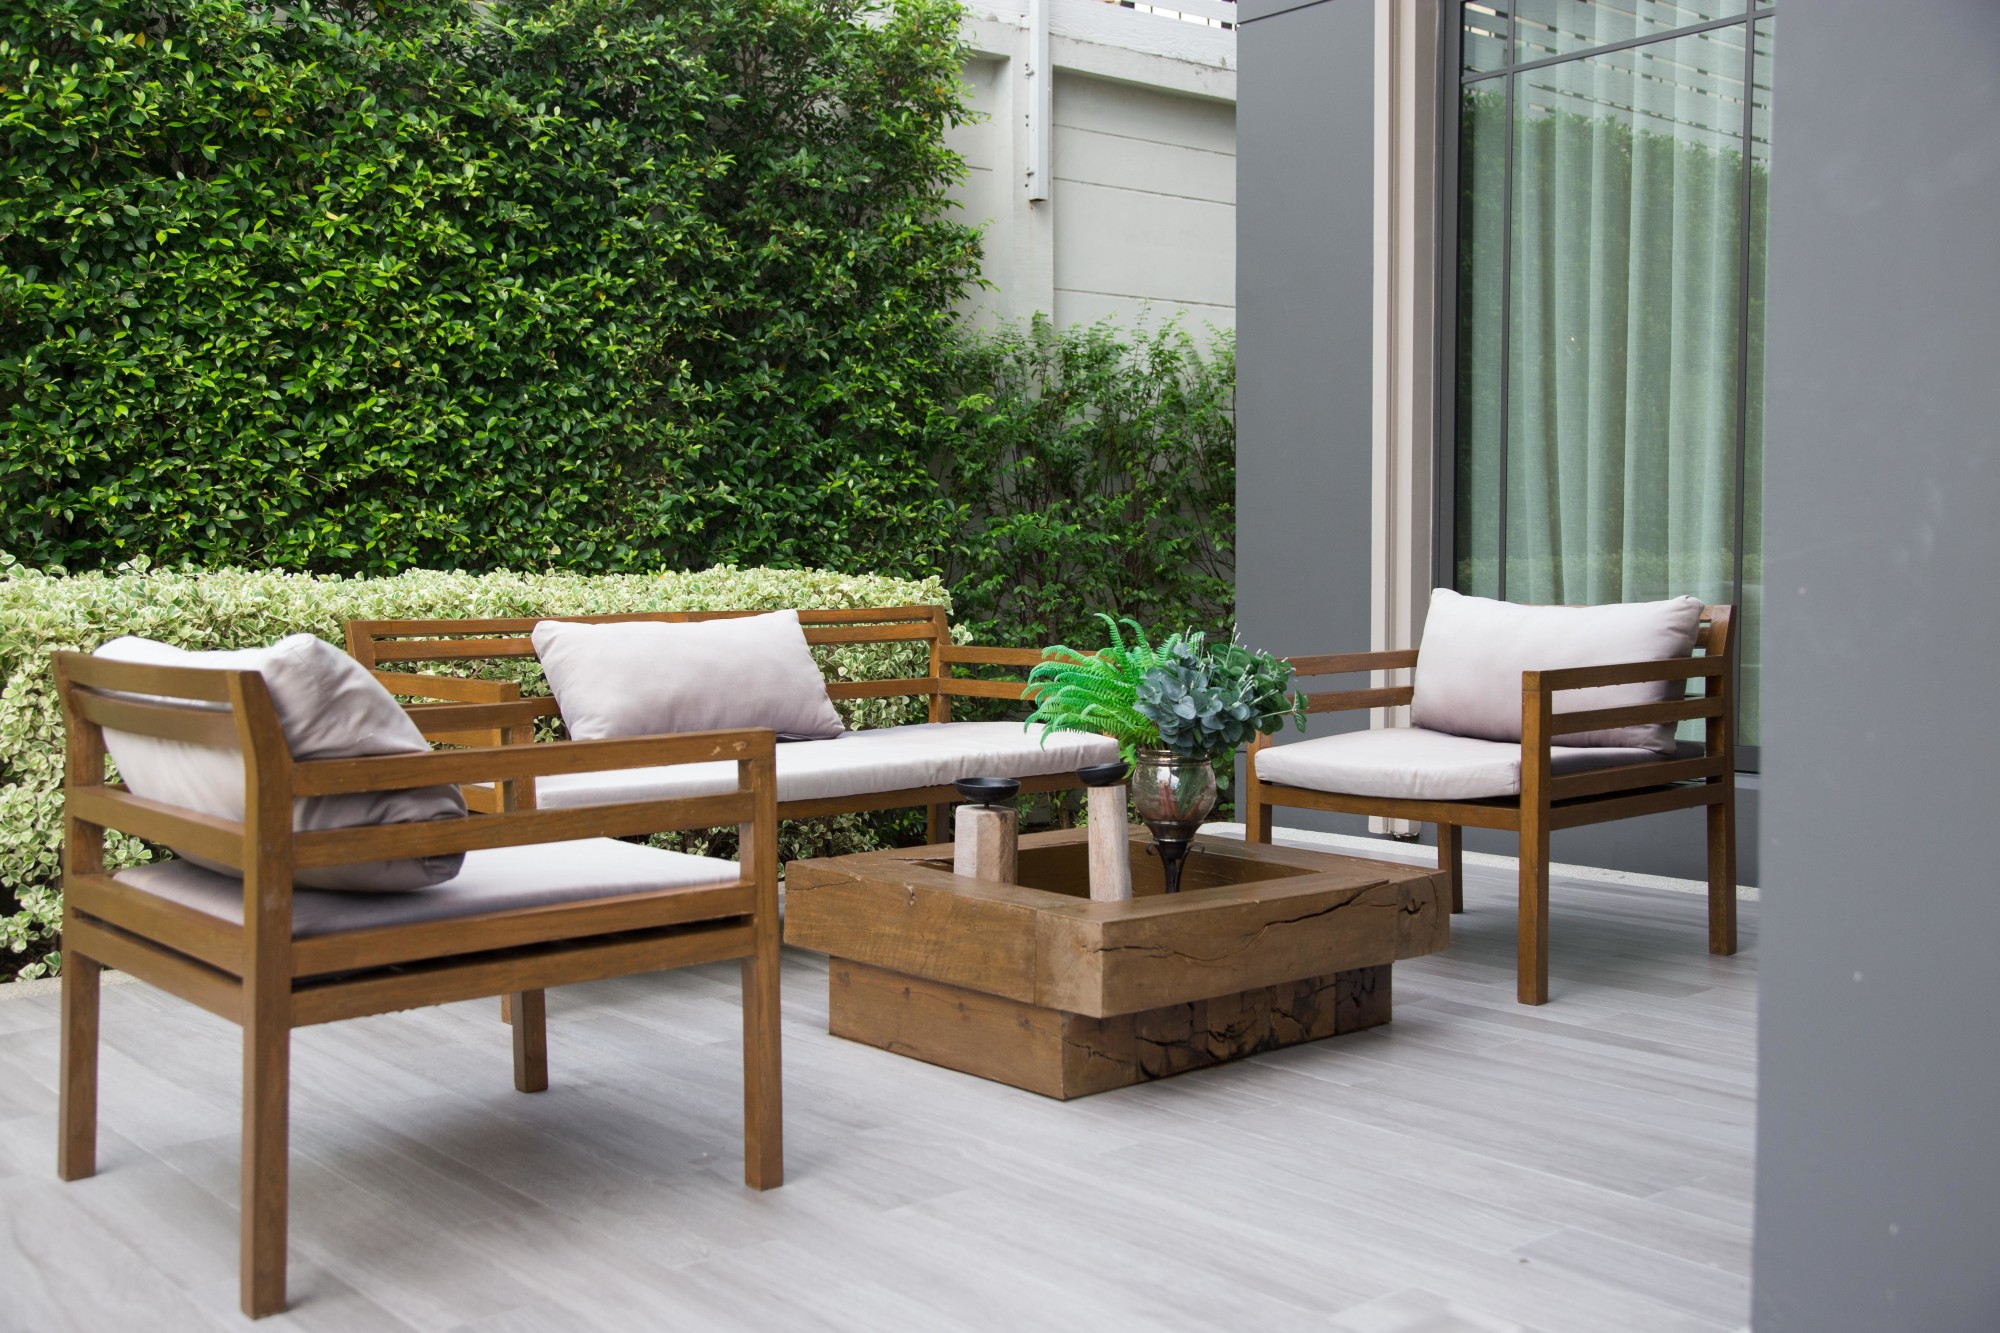 outdoor living spaces